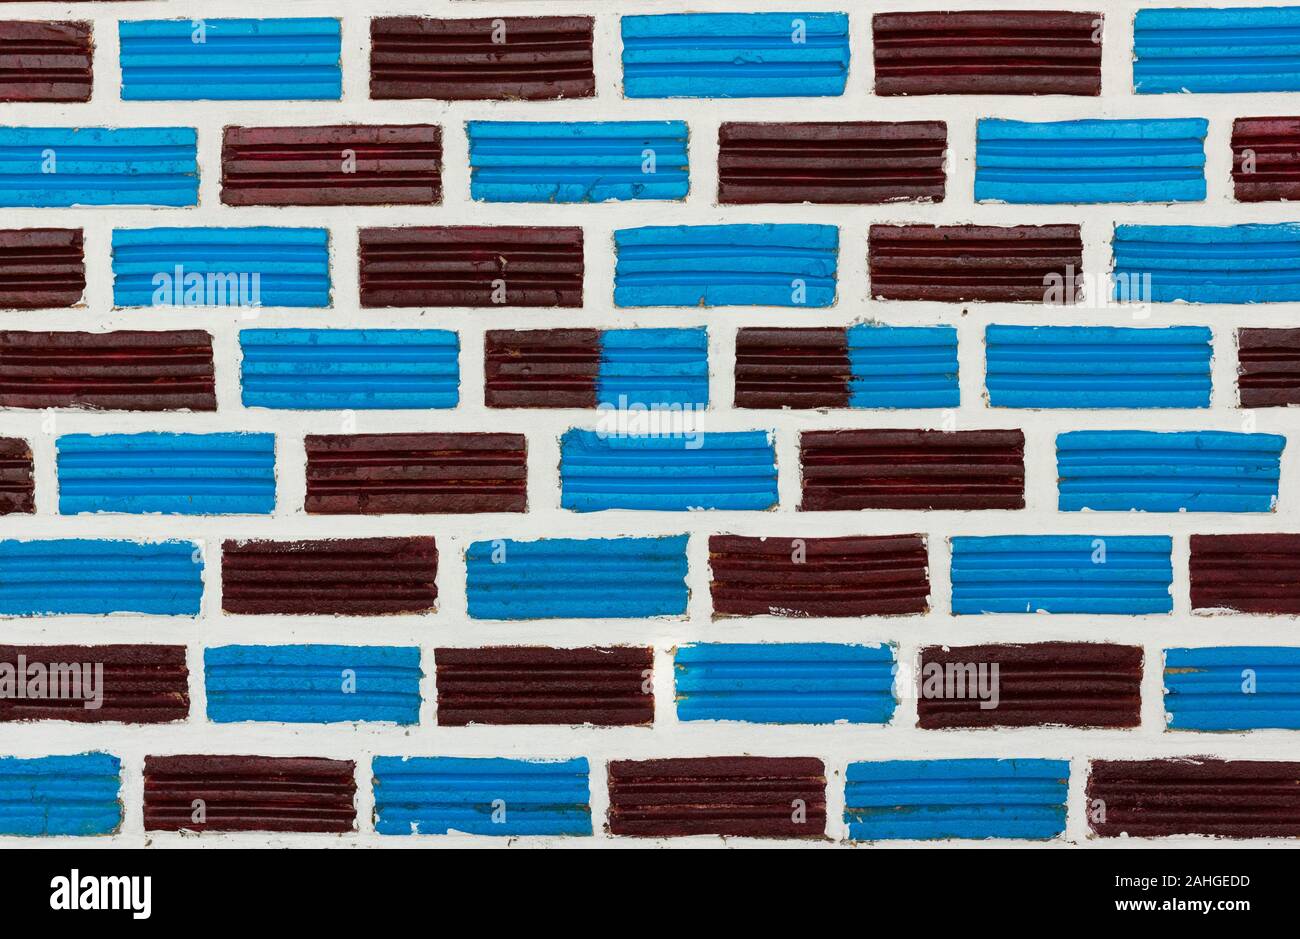 Brown and blue brick wall pattern texture background of a remodel bar shack Stock Photo